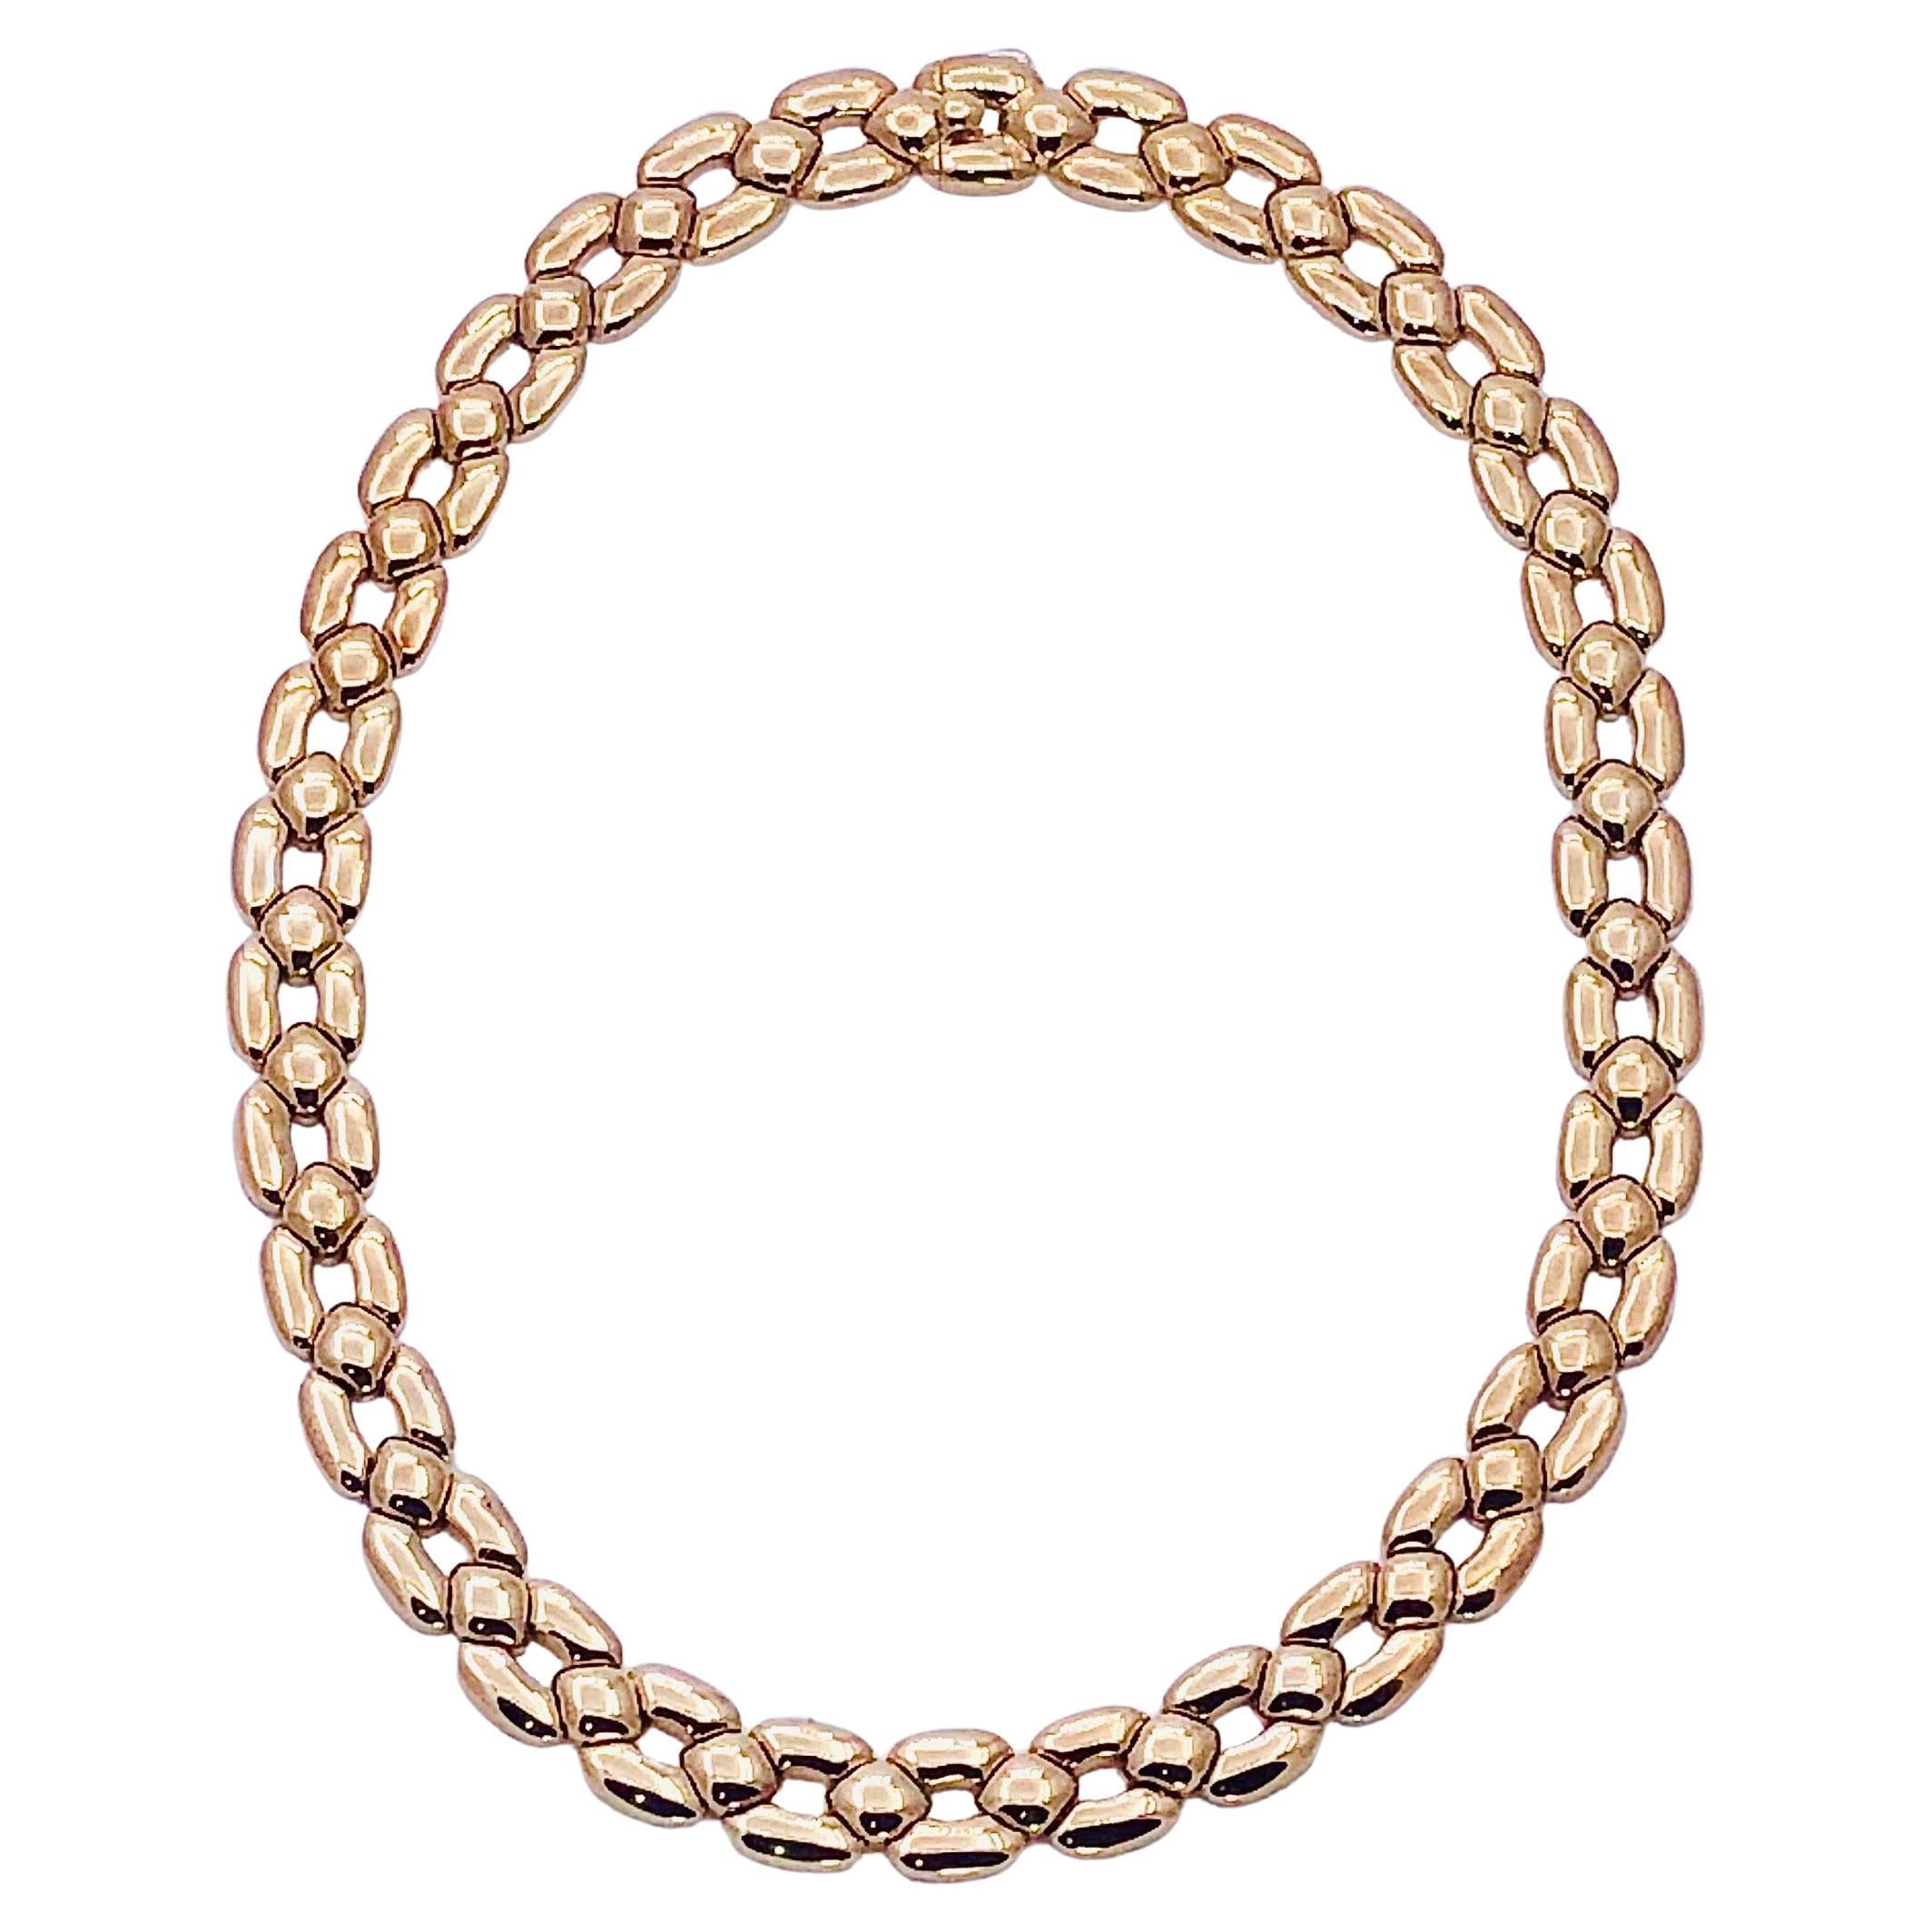 Created by Cartier in 1992, this 16 1/2 inch long necklace is a member of the 